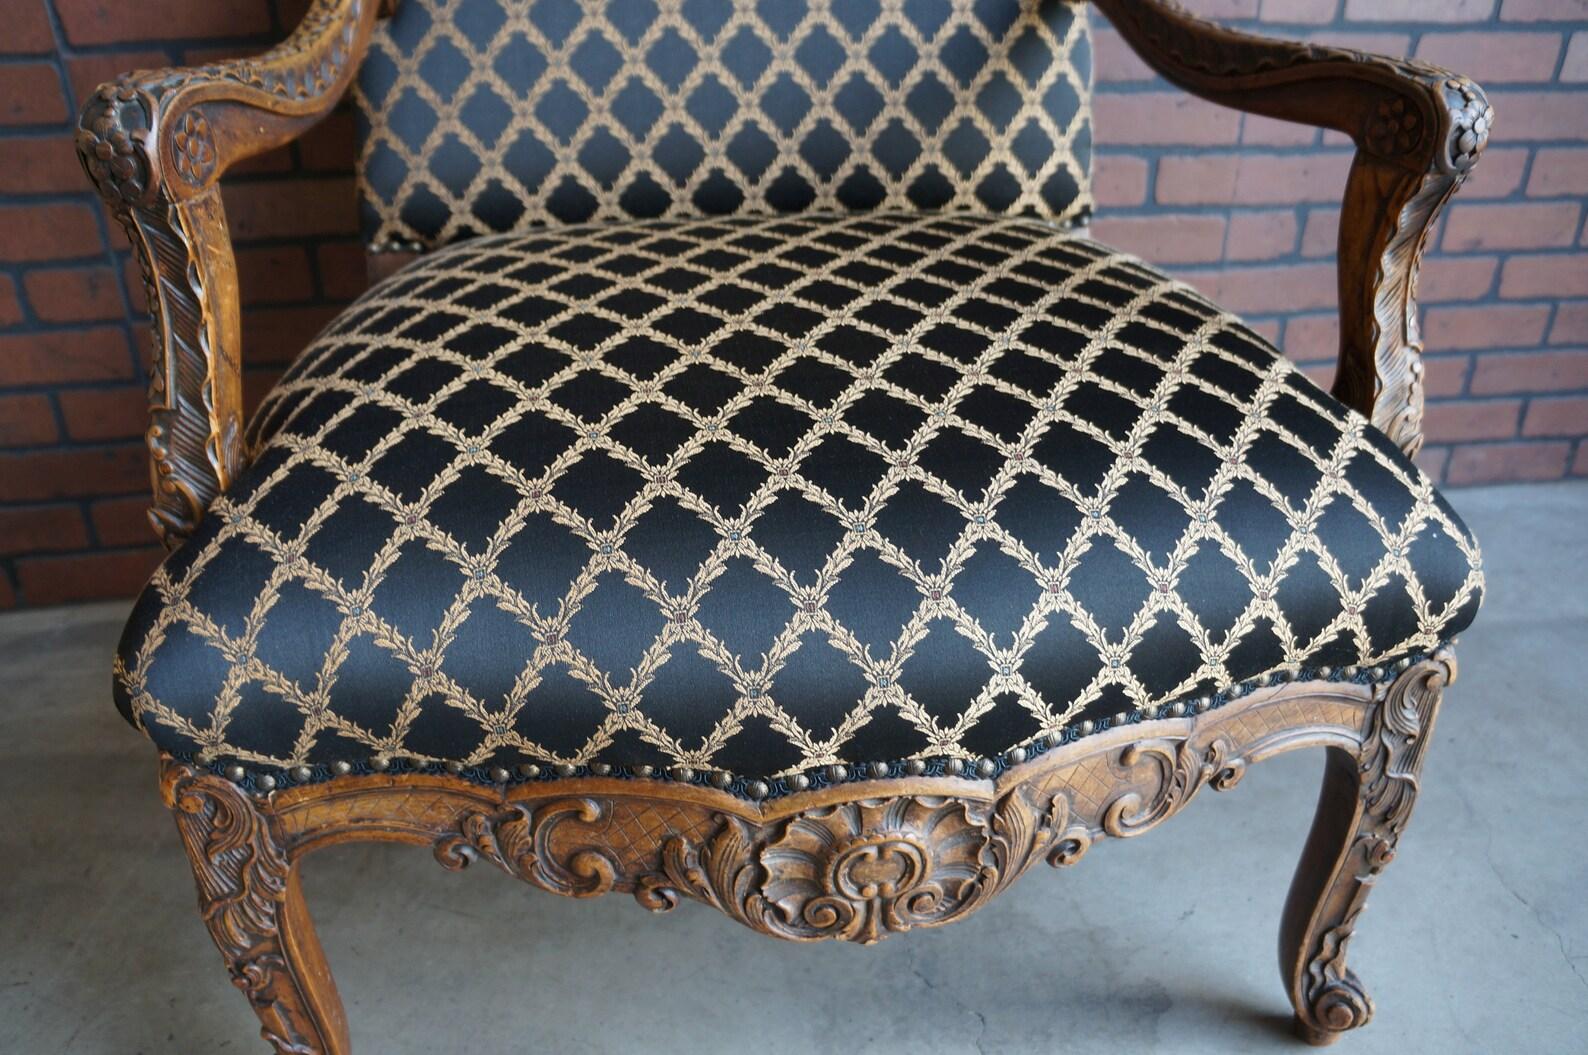 Incredible hand carved wood frame upholstered arm chair. The perfect compliment to any European Inspired decor. Upholstered in a lovely diamond pattern with solid black back, detailed with gimp trim and nailhead, a beautiful designer touch.